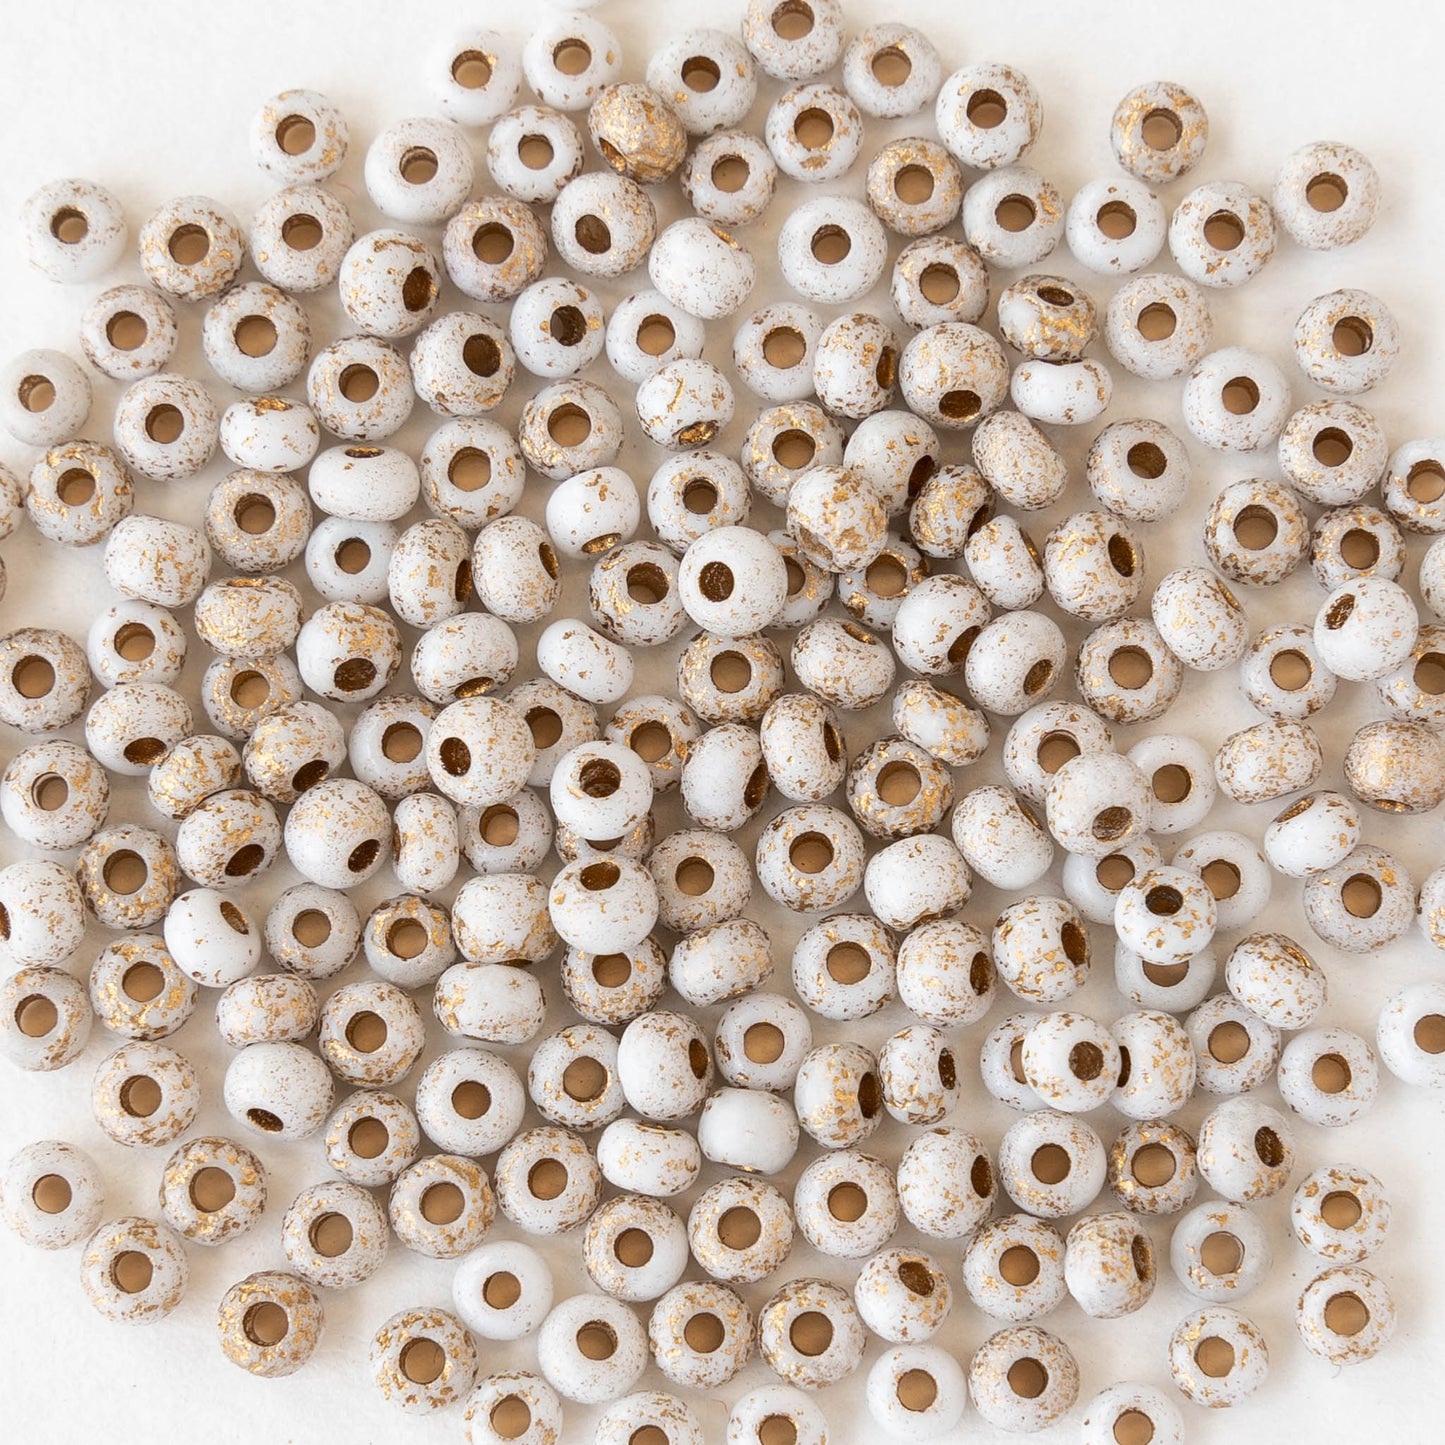 Size 6 Seed Beads - Opaque White with Gold Dust - Choose Amount